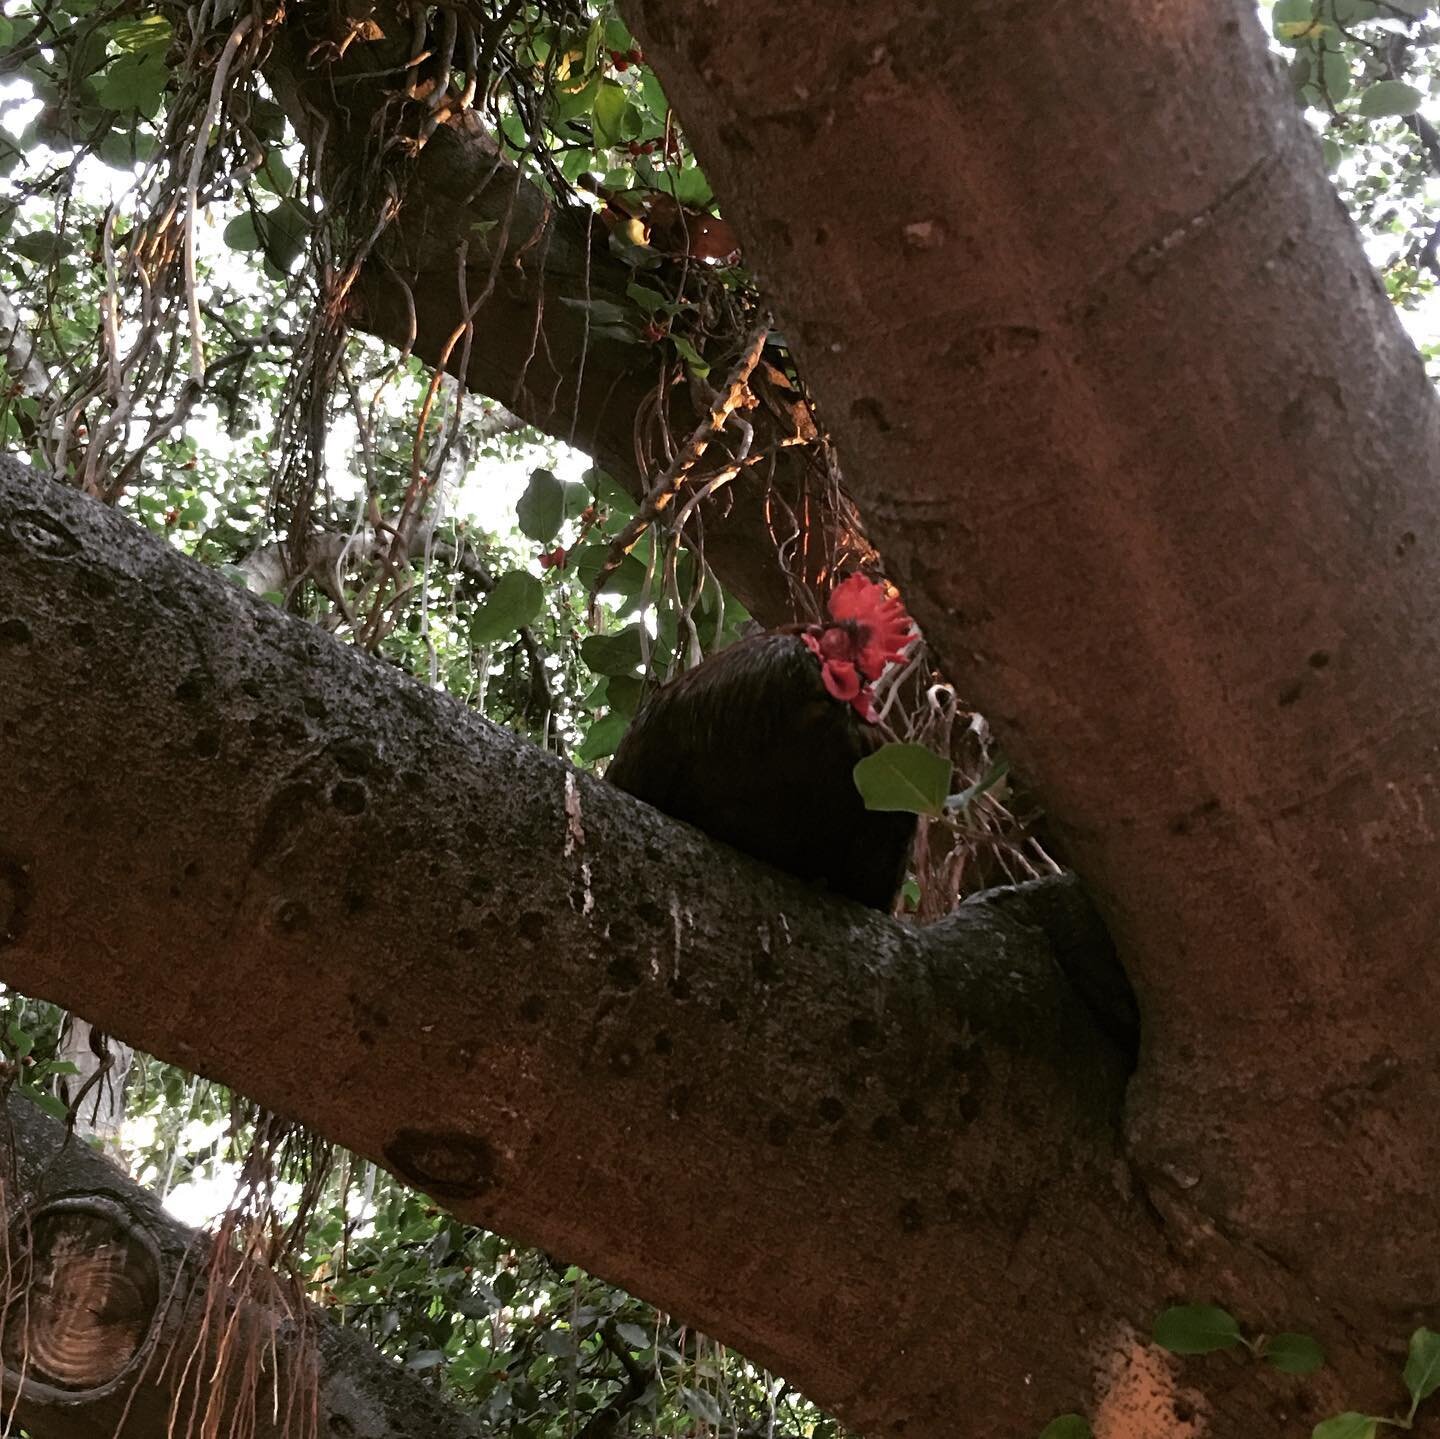 Chicken in the tree at the Lahaina town banyan. What a relaxing island.